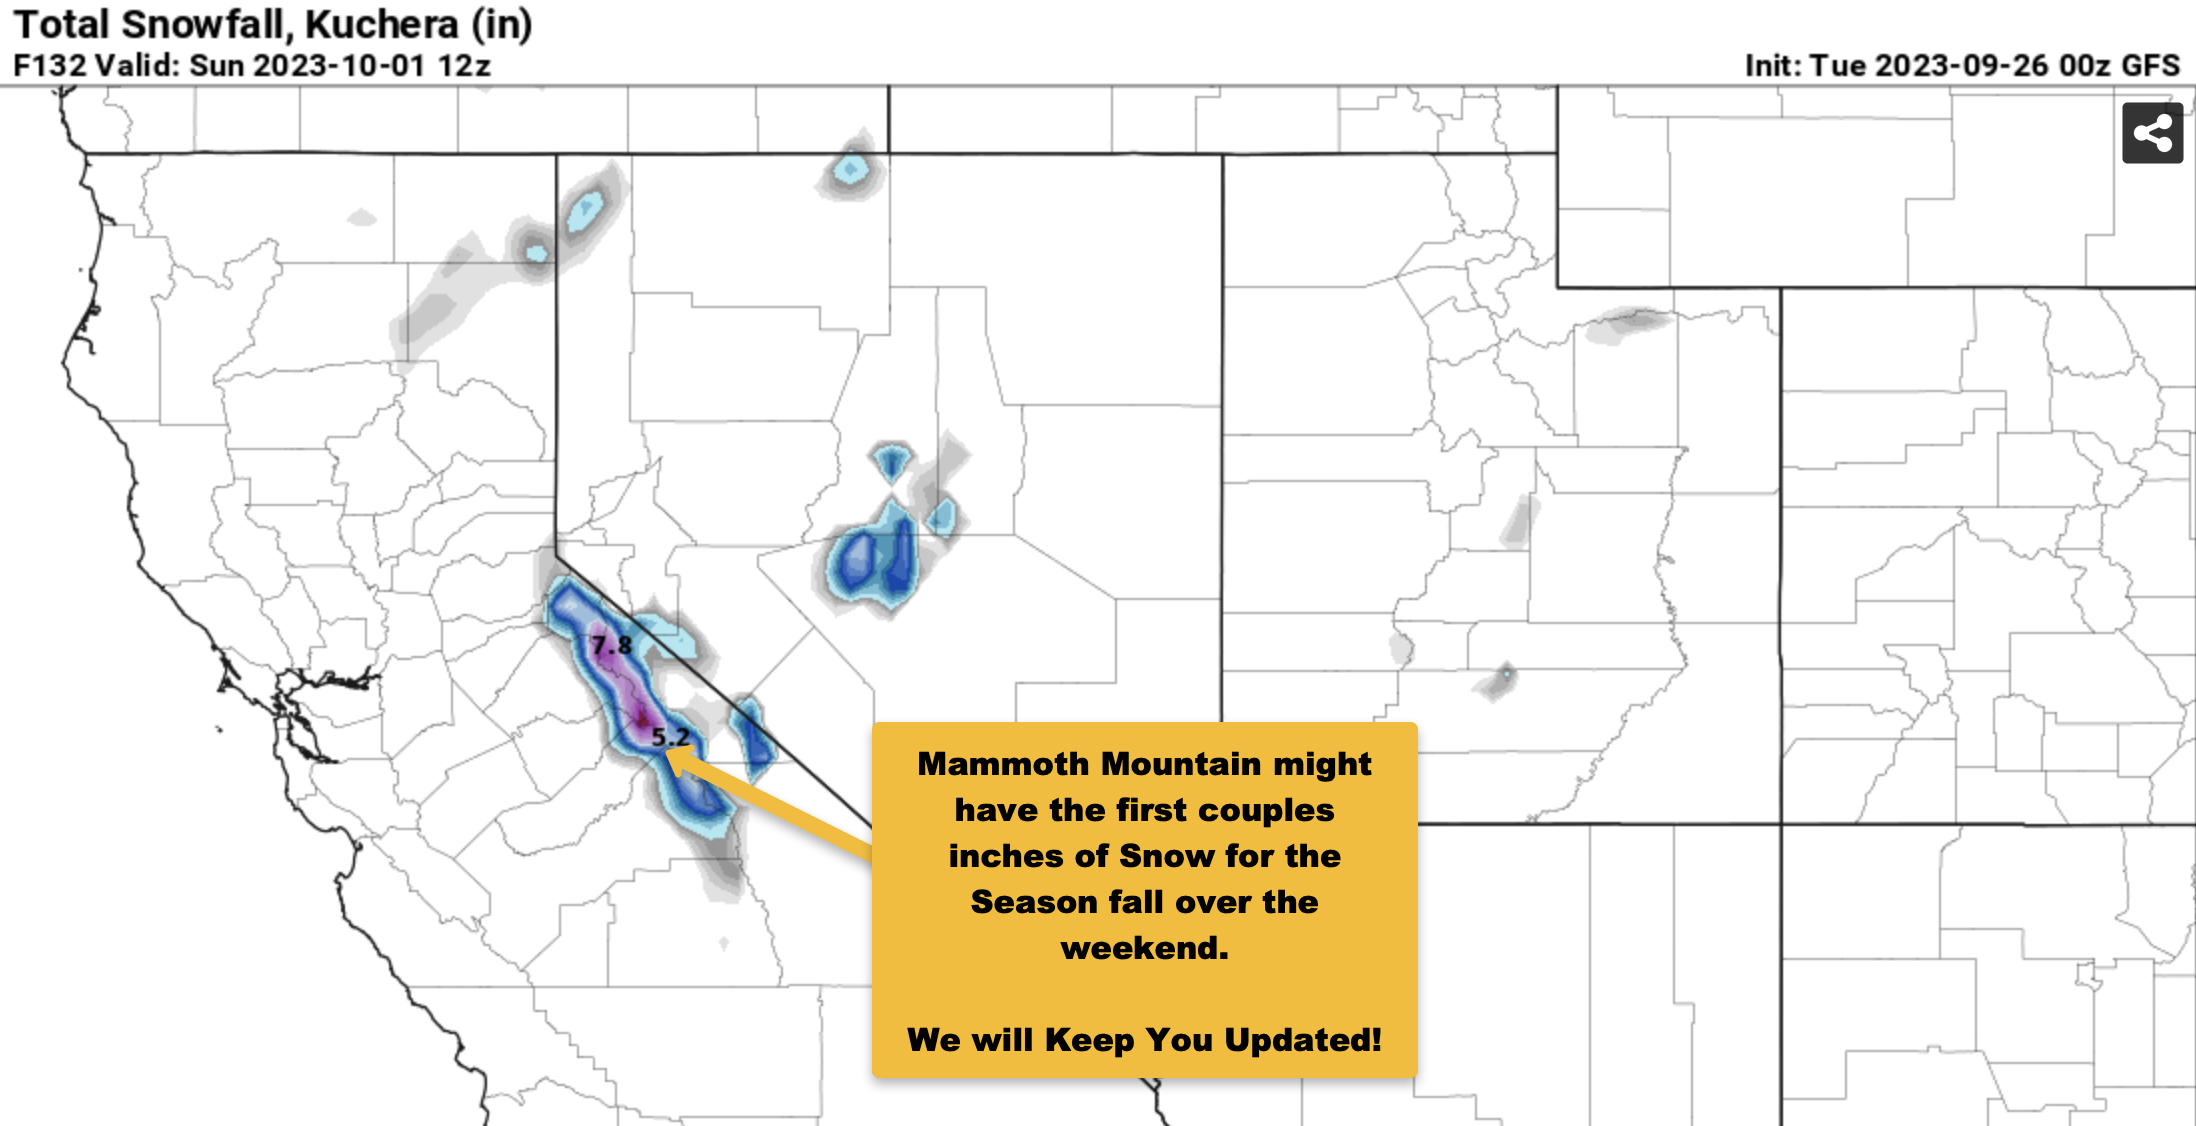 For Our Full Mammoth Mountain Weather Forecast - Click Here